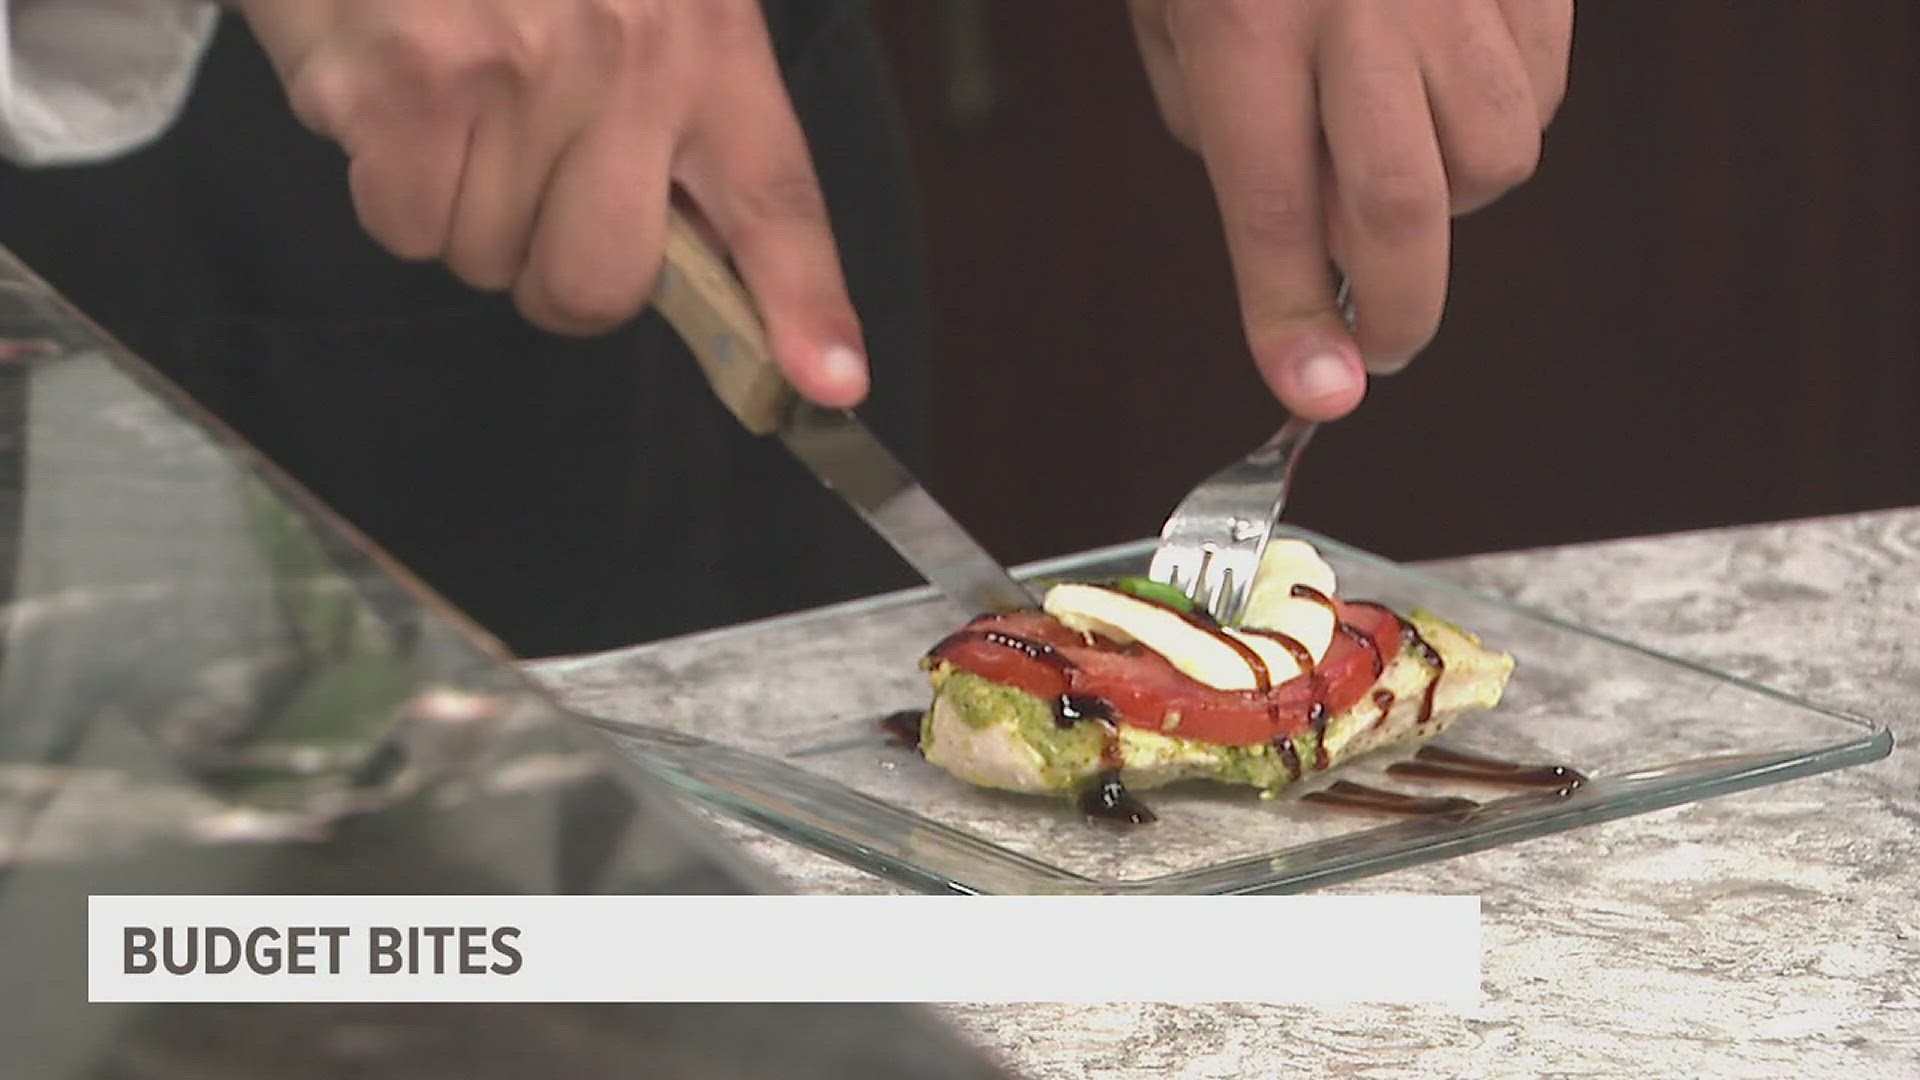 News 8 takes viewers into the kitchen for a refreshing take on chicken caprese.